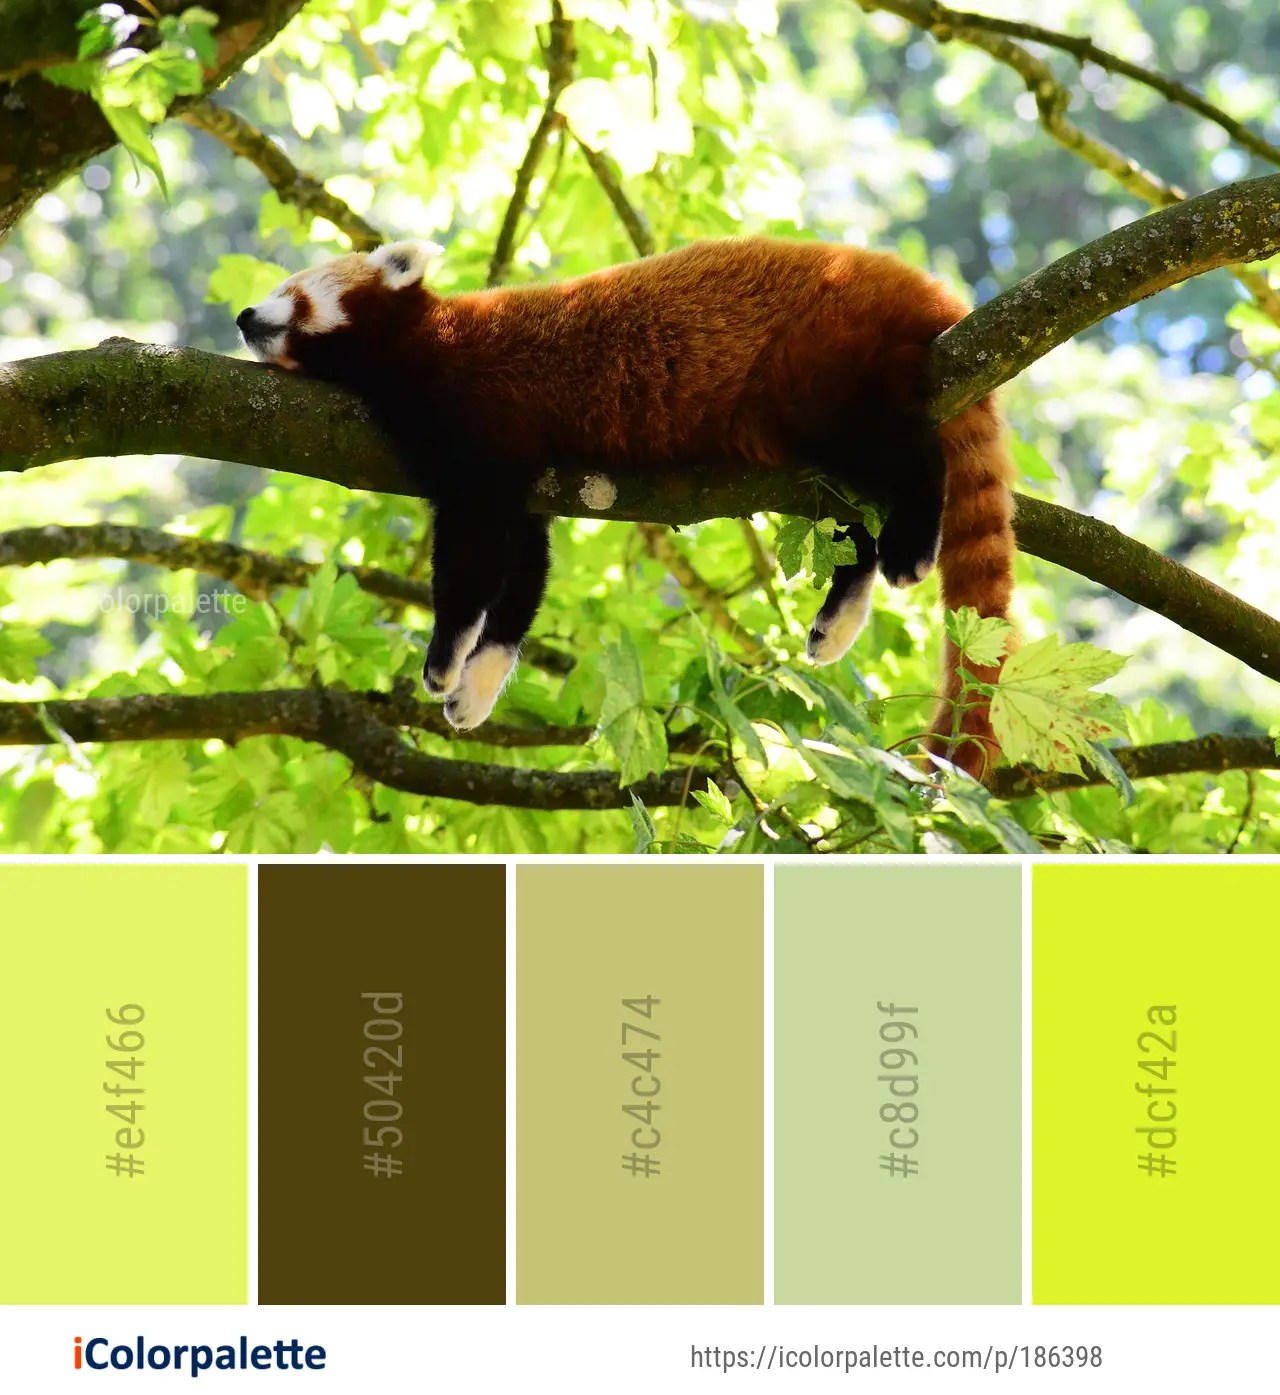 Red panda color palette ideas in